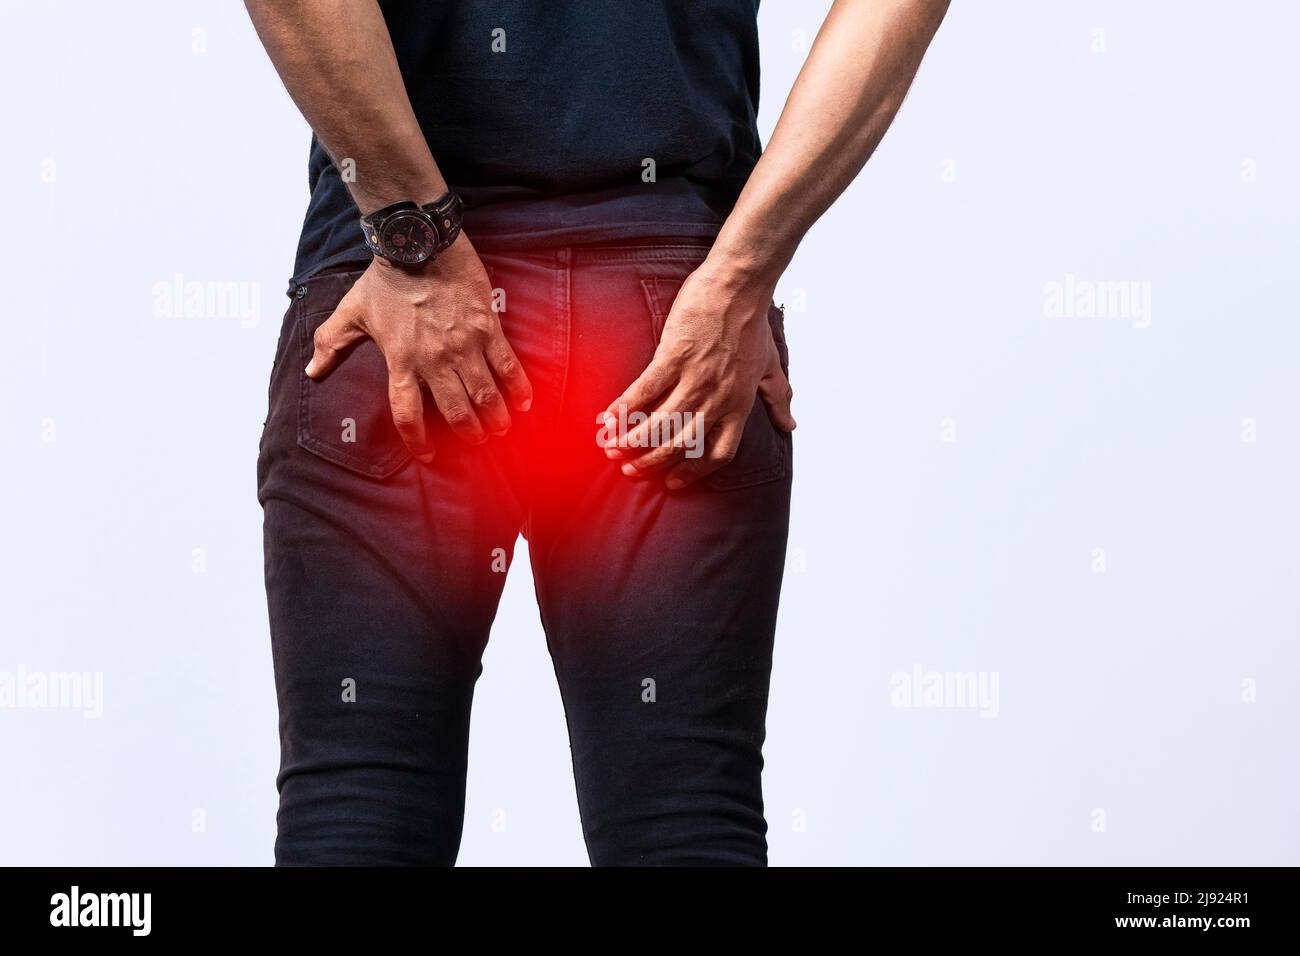 People with digestive problem touching his buttock, man with hemorrhoid problem on isolated background, People with diarrhea problem Stock Photo